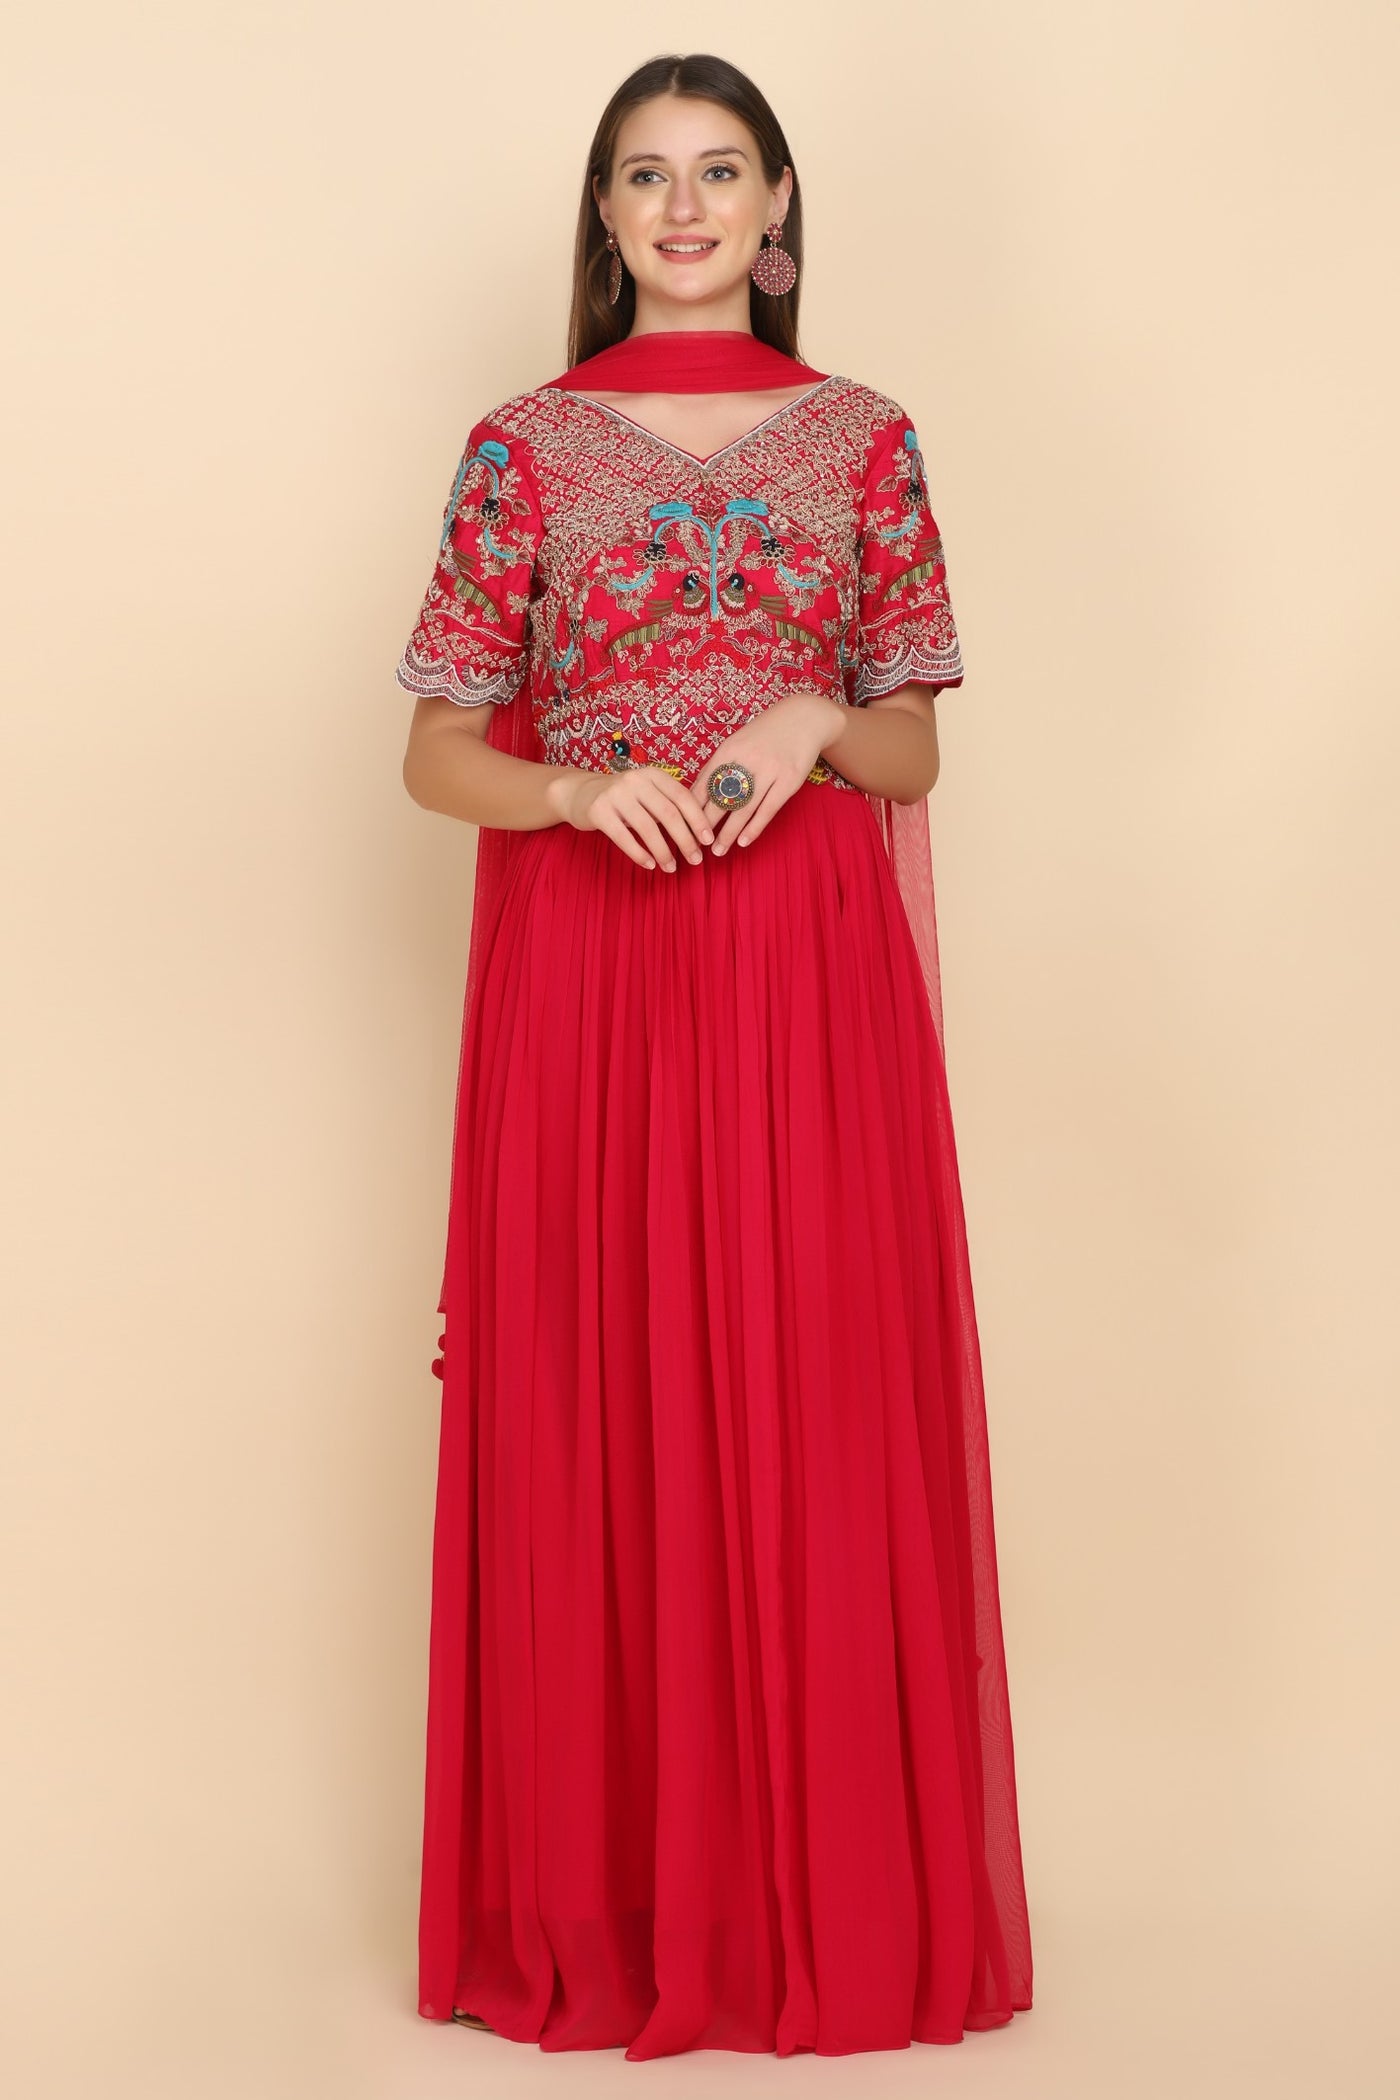 front look of floral embroidered dress